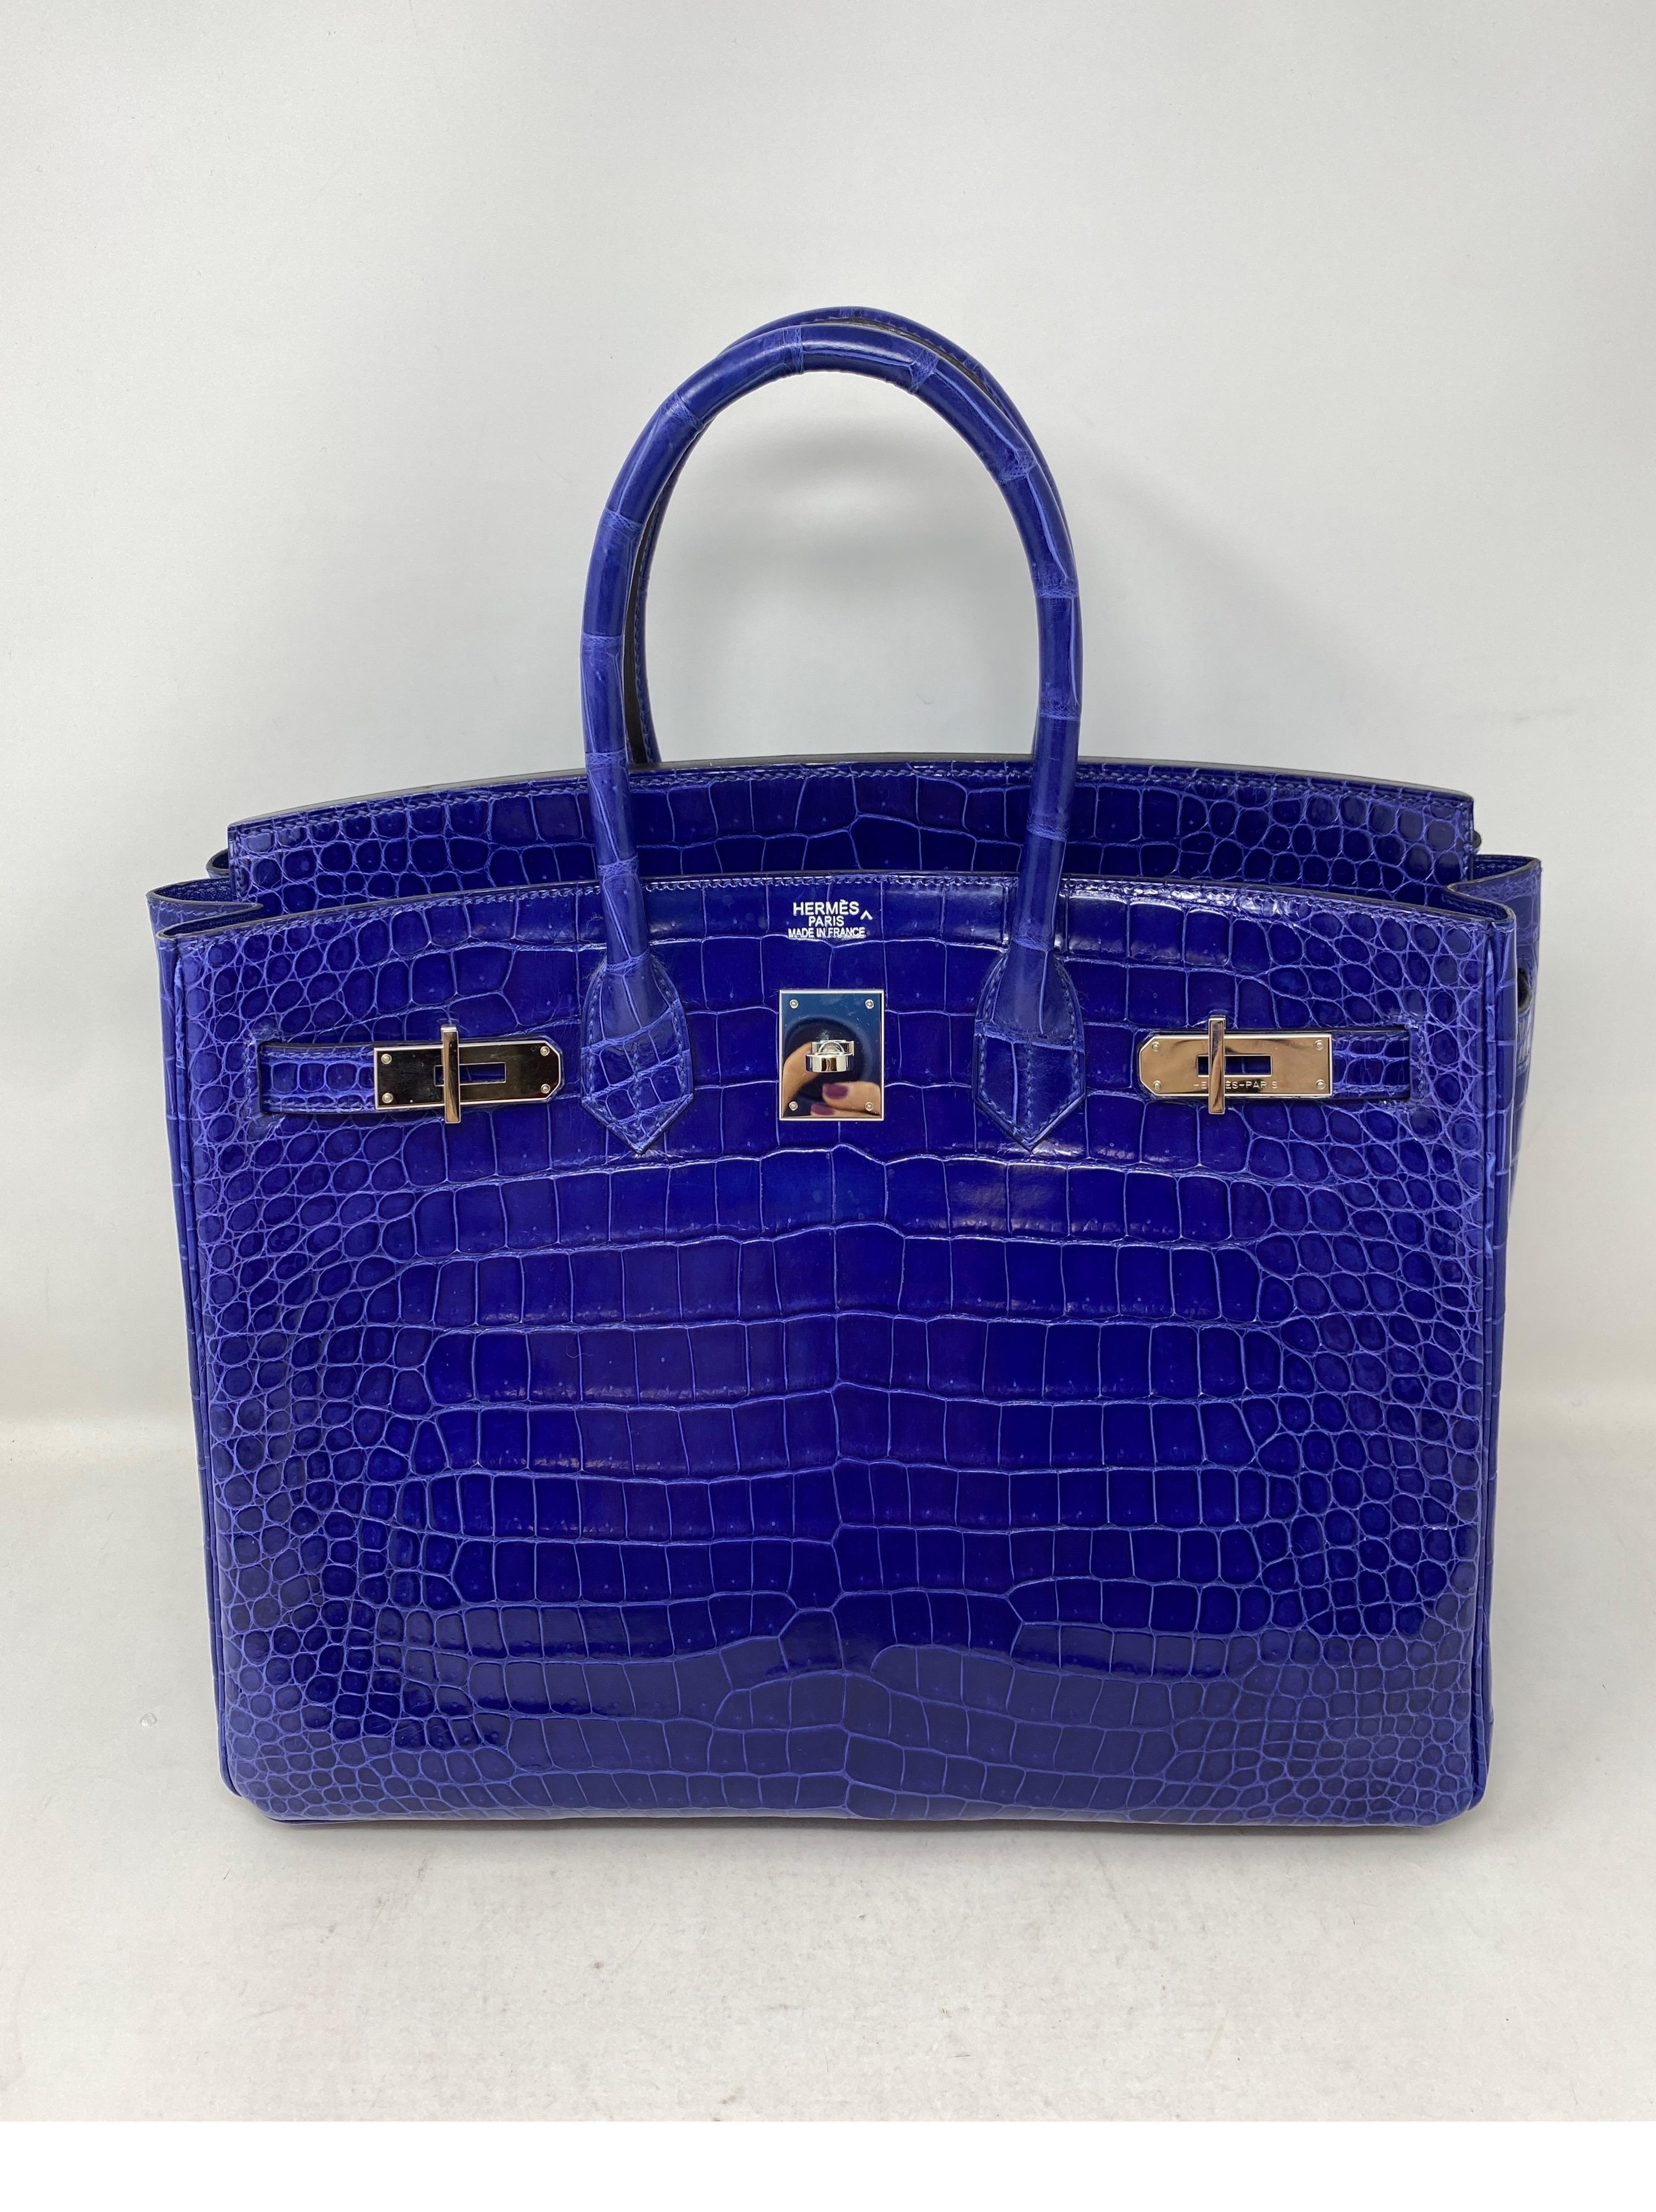 Hermes Blue Electrique Crocodile Birkin 35 Bag. Excellent like new condition. Stunning and rare blue color. Palladium hardware. Collector's piece. Investment bag. Includes original receipt, Cites paperwork. Includes clochette, lock, key, and dust